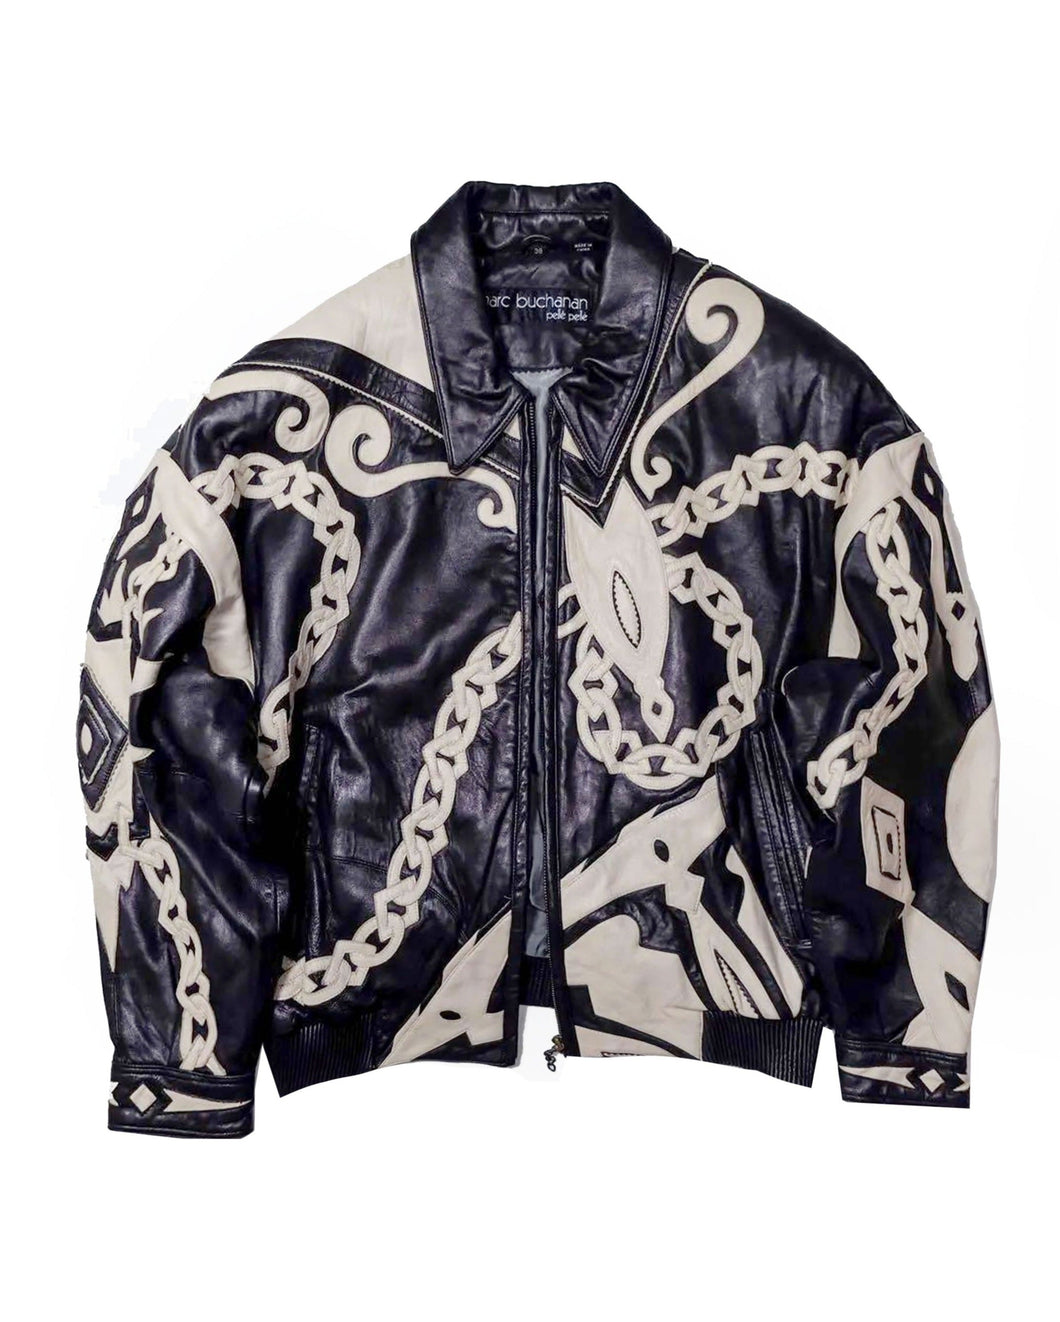 Pelle Pelle Embroidered Leather Black and White Jacket